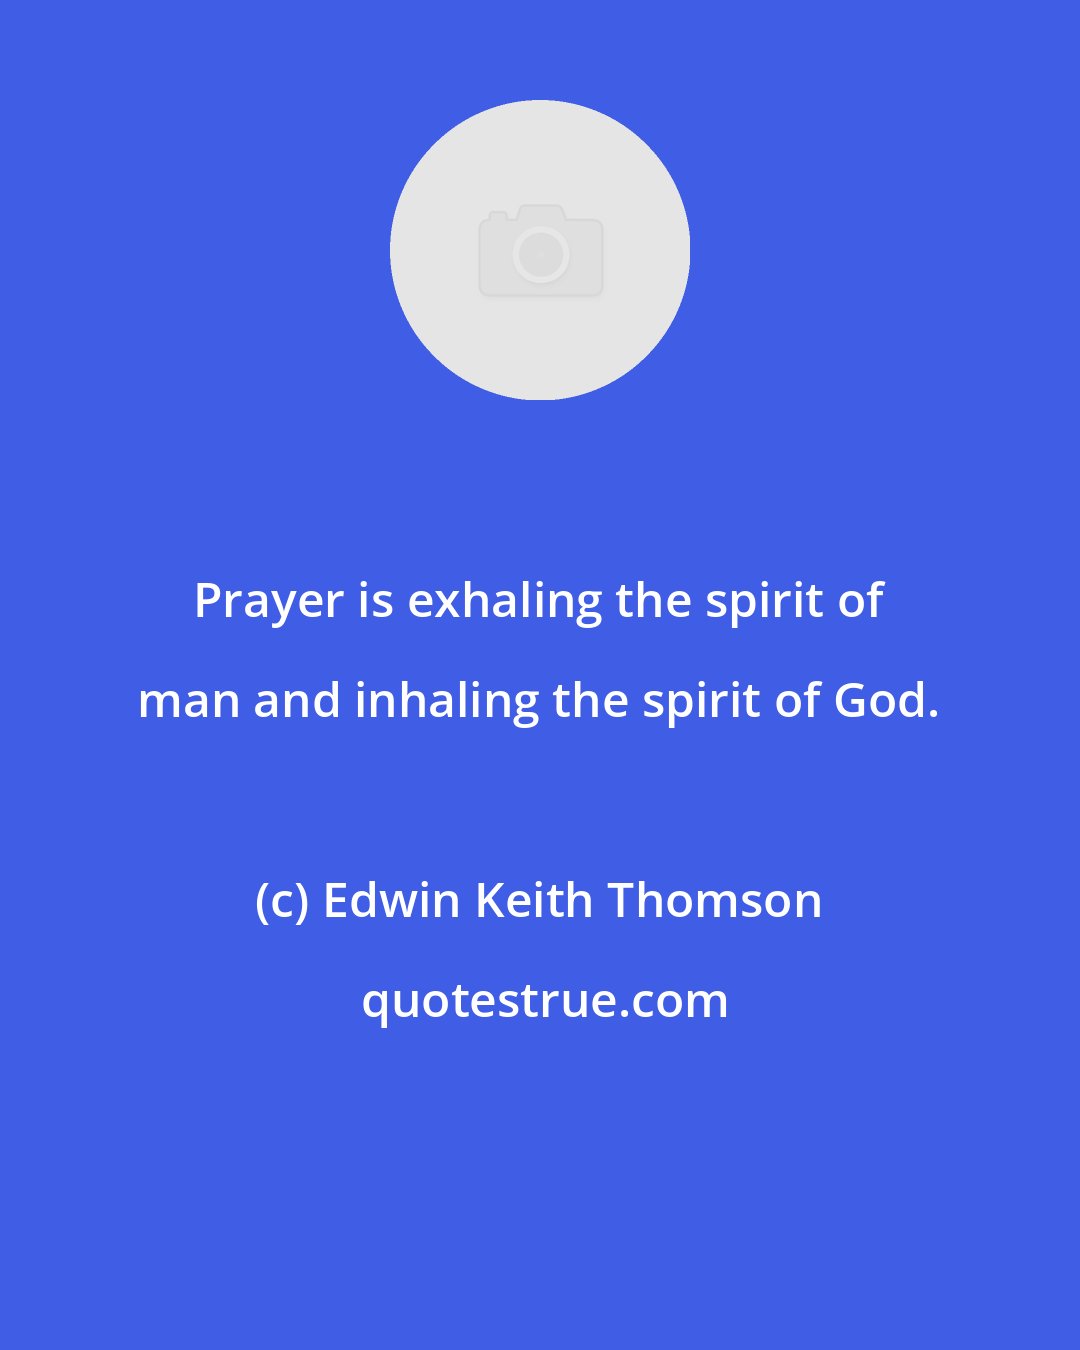 Edwin Keith Thomson: Prayer is exhaling the spirit of man and inhaling the spirit of God.